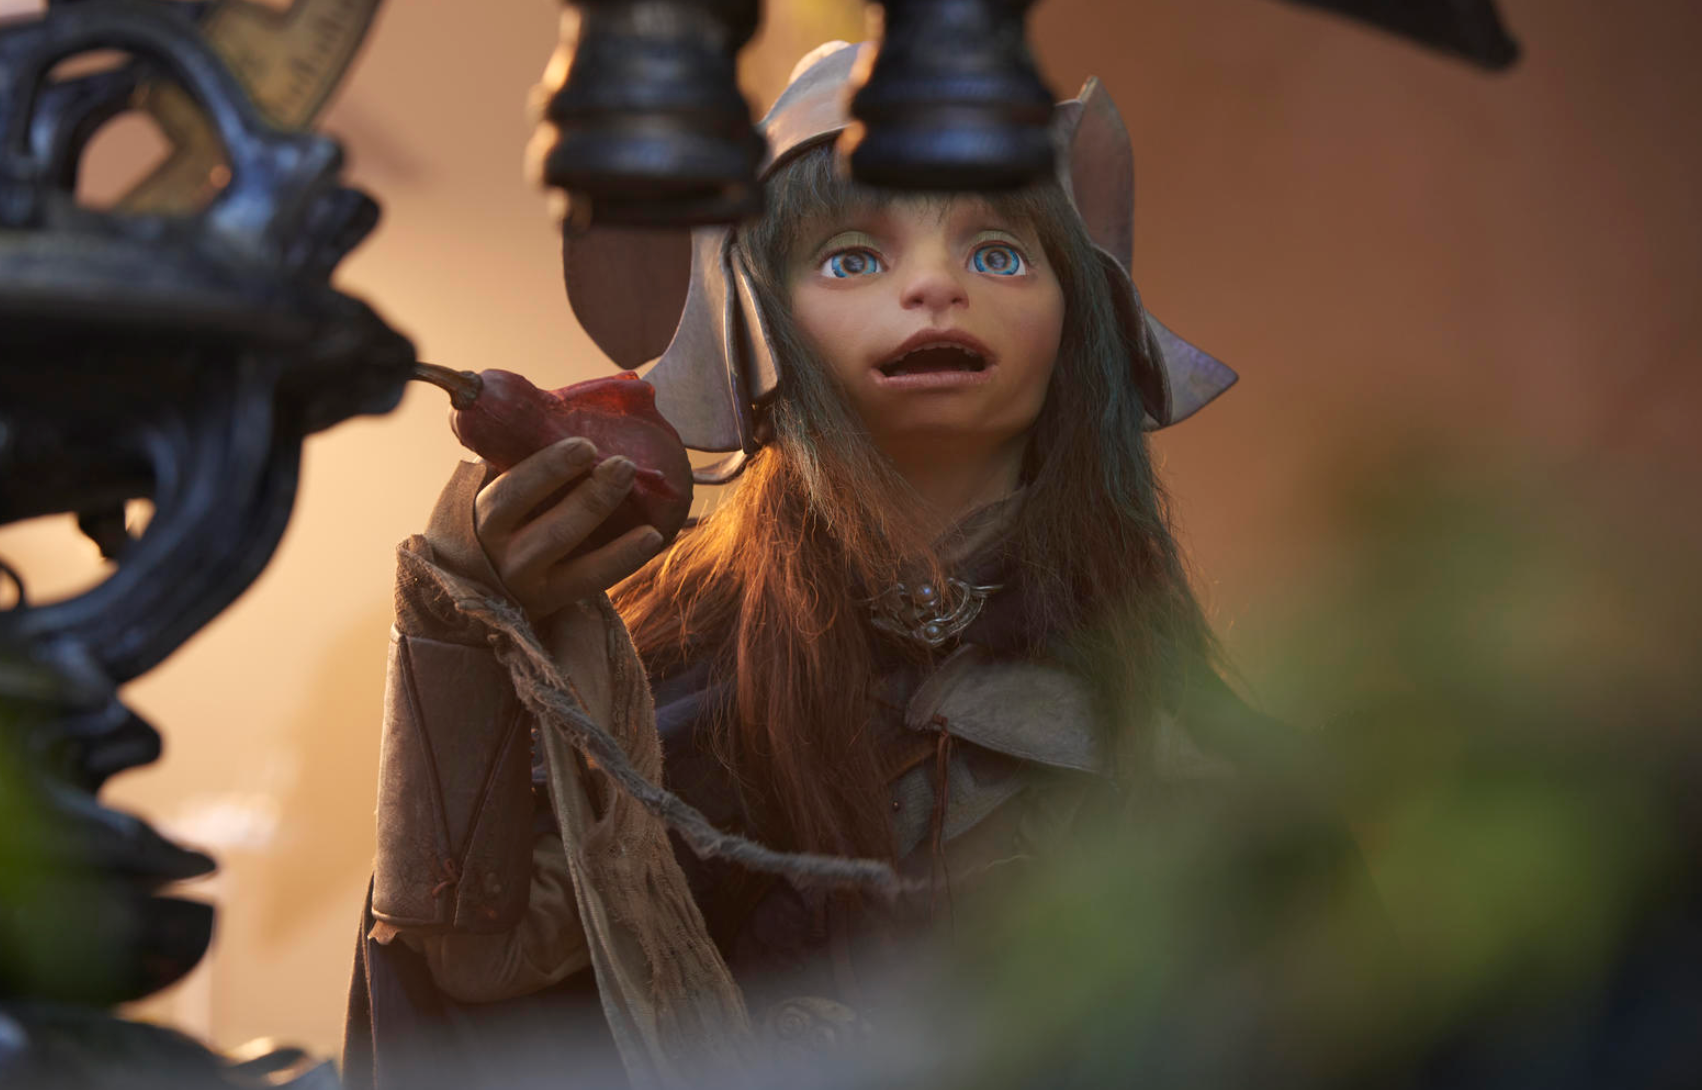 Netflix’s Dark Crystal Prequel Series Gets a Premiere Date, New Images